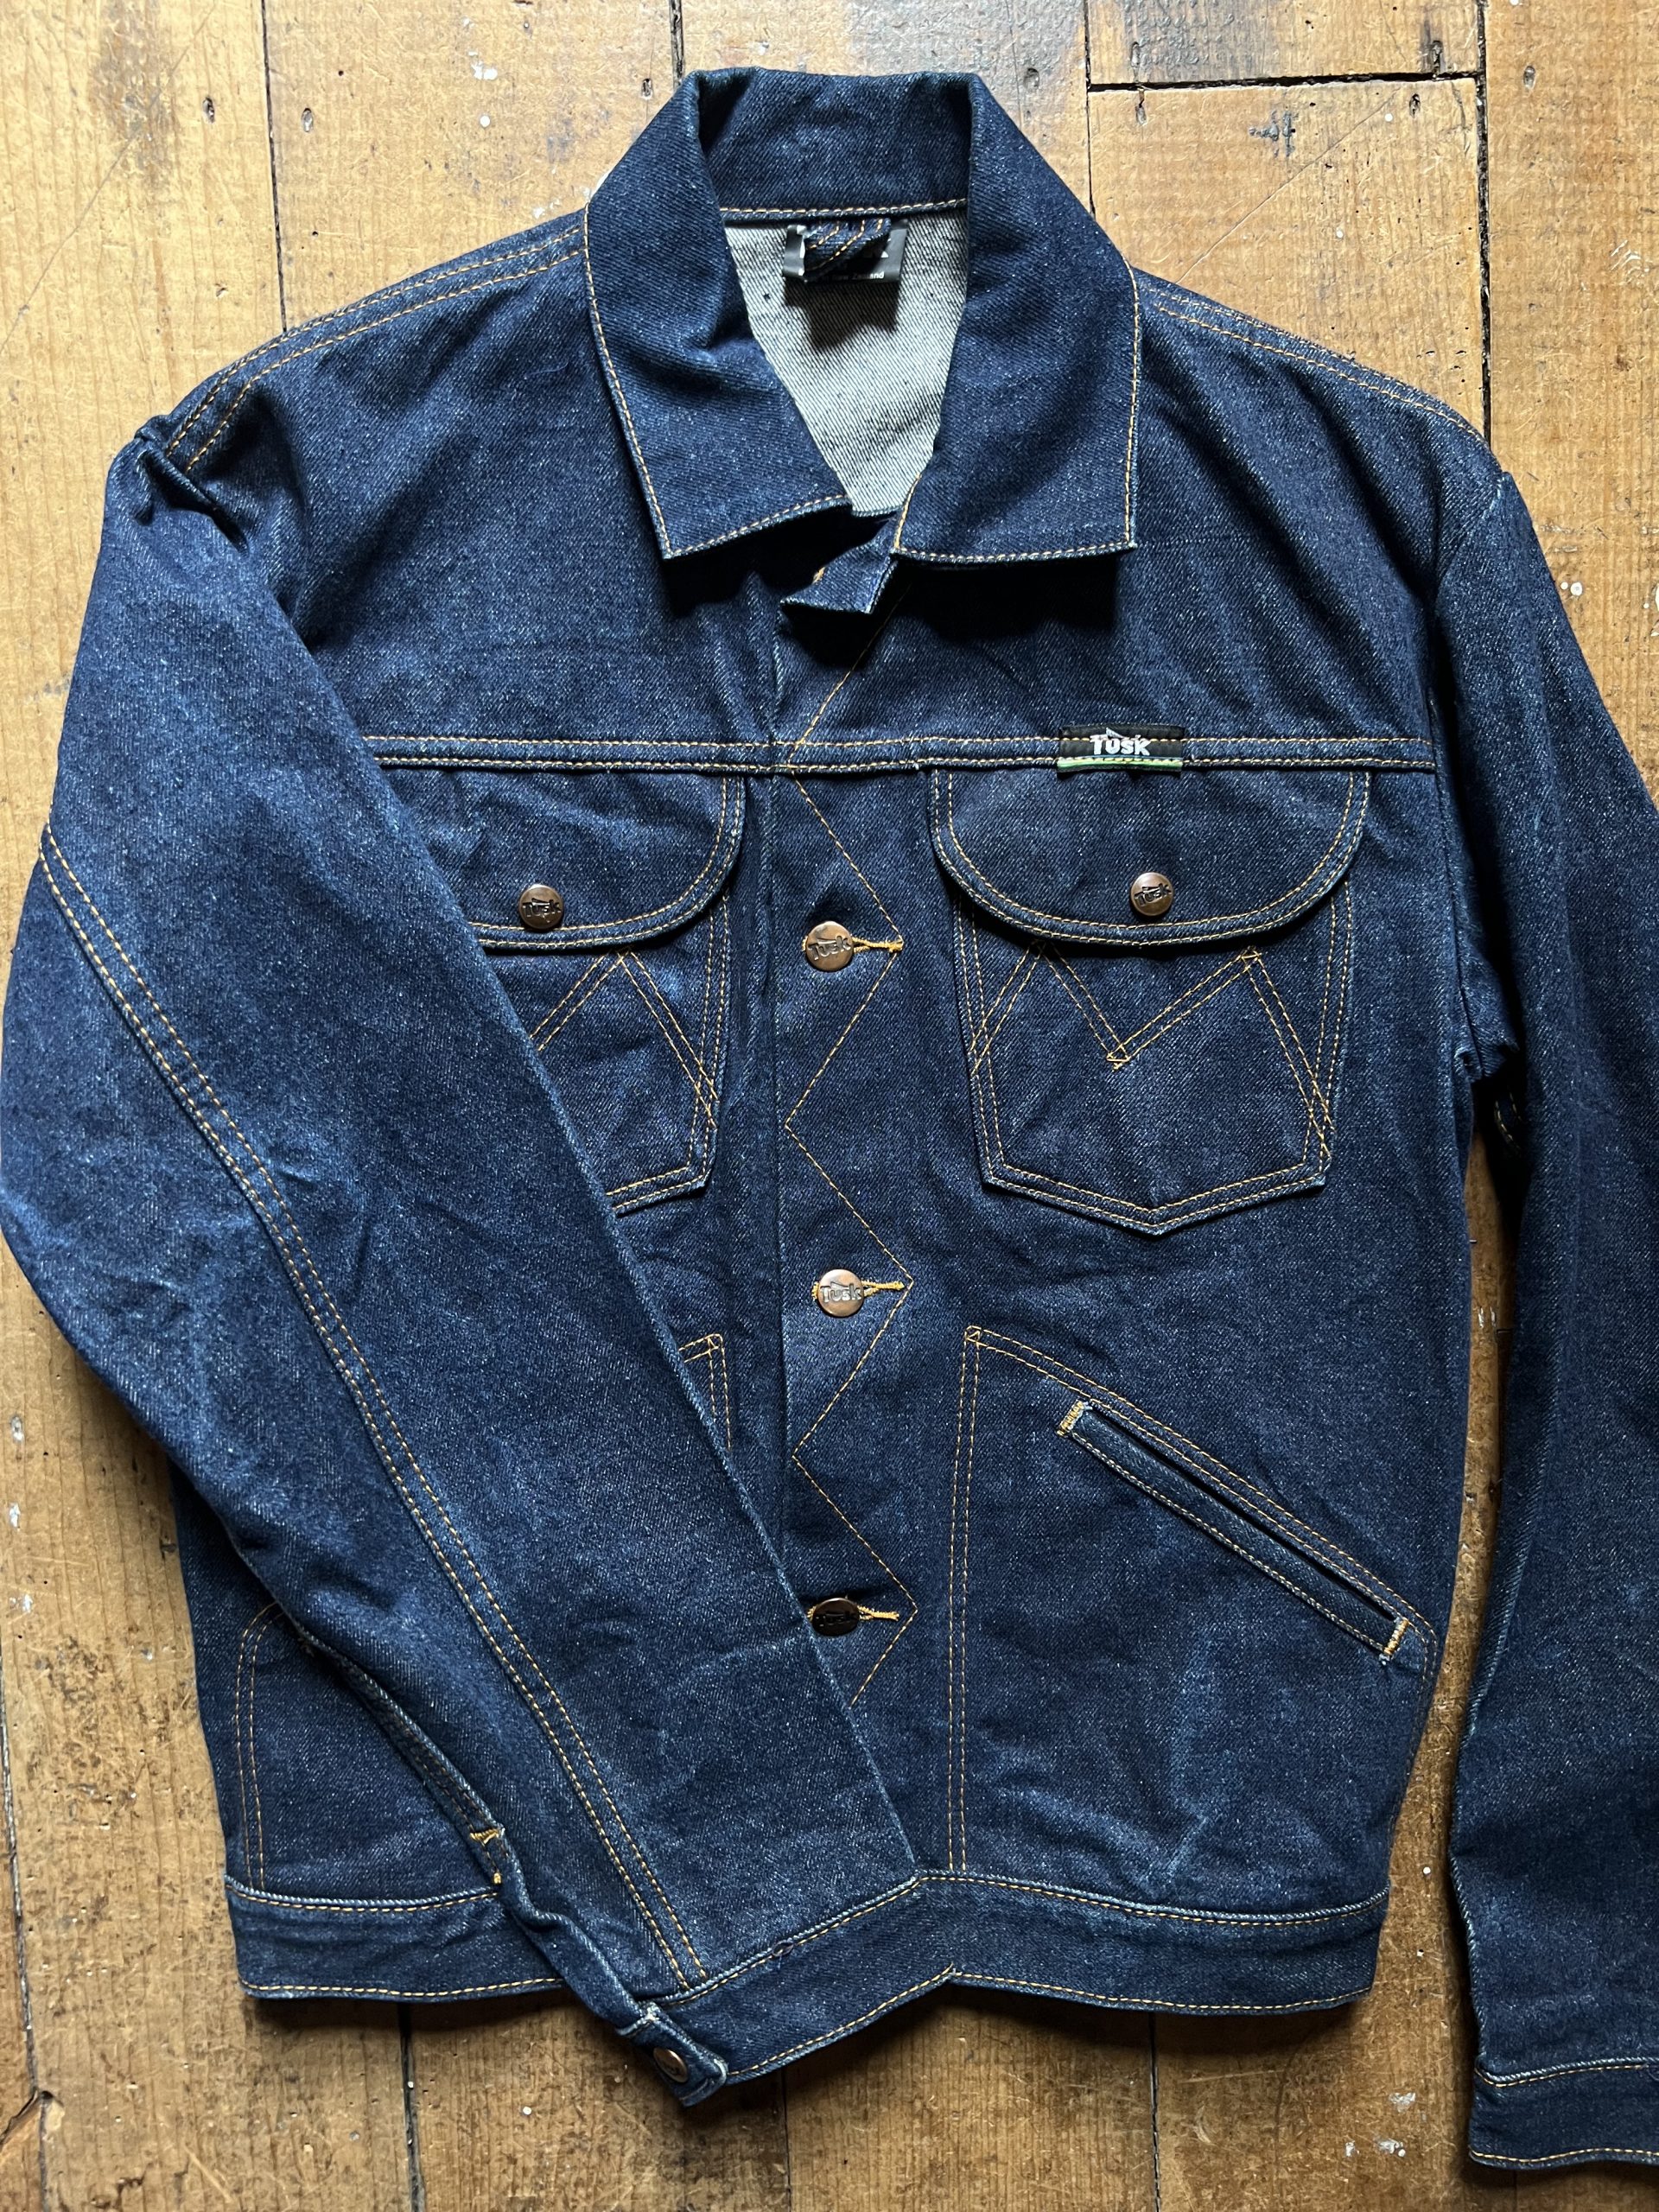 TUSK Denim Jacket - Search and Destroy